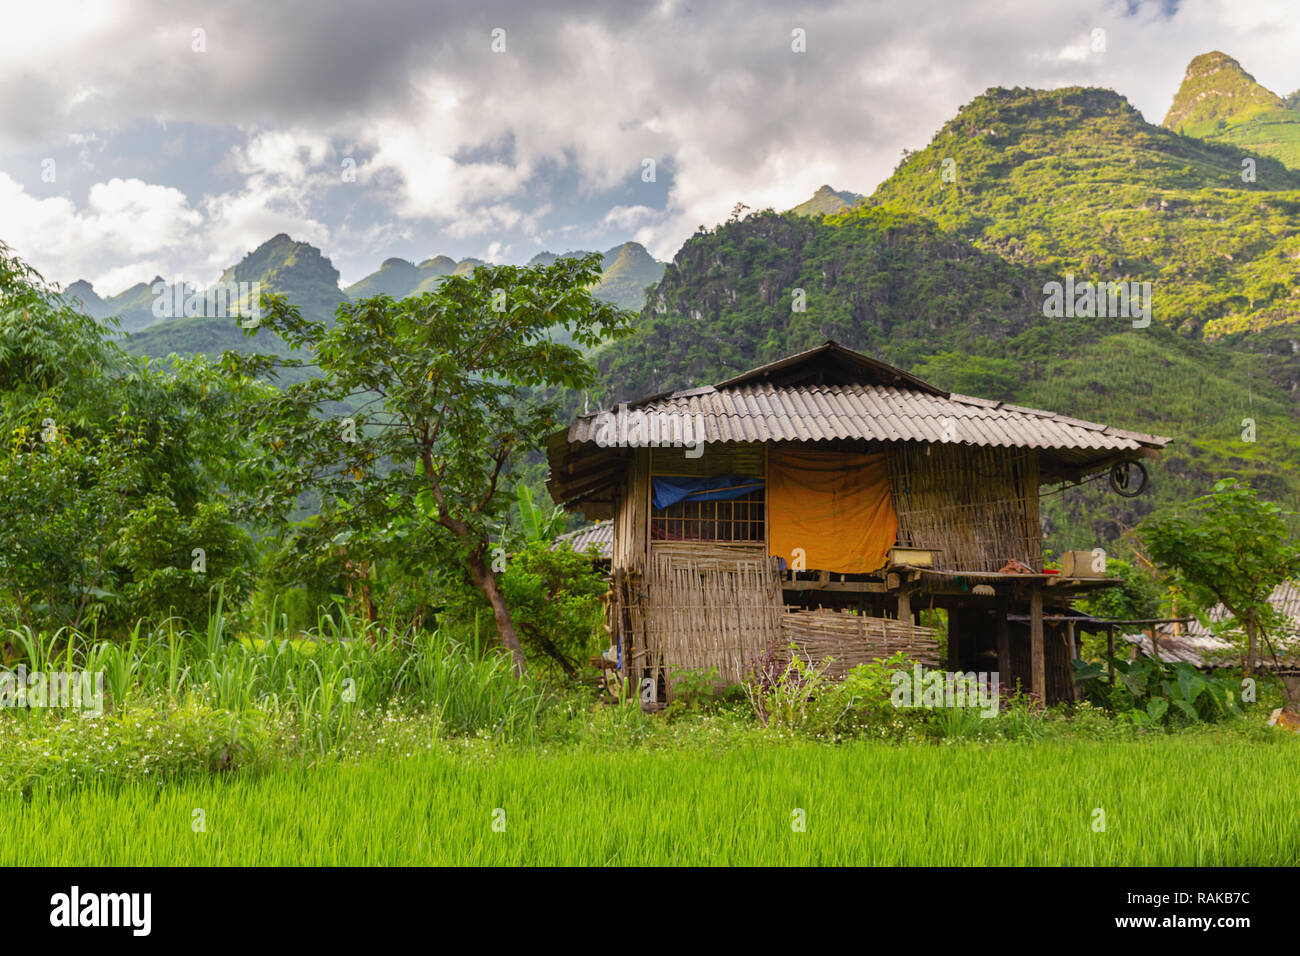 Vietnamese farmhouse sitting on the edge of a rice patty.  Ha Giang Loop, Ha Giang Province, Dong Van, Vietnam, Asia Stock Photo